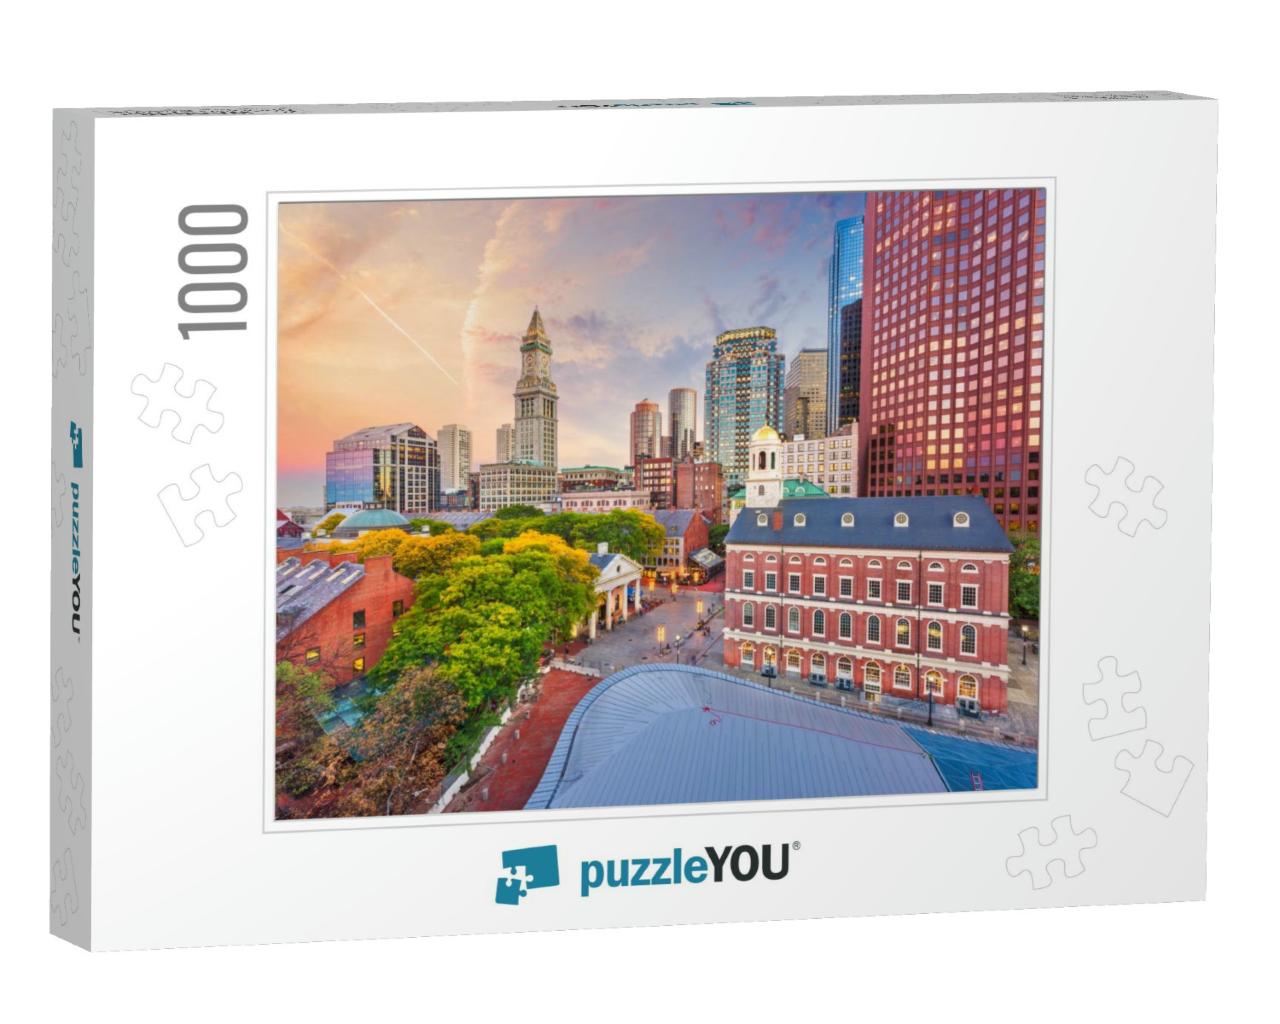 Boston, Massachusetts, USA Downtown Markets & Cityscape At... Jigsaw Puzzle with 1000 pieces